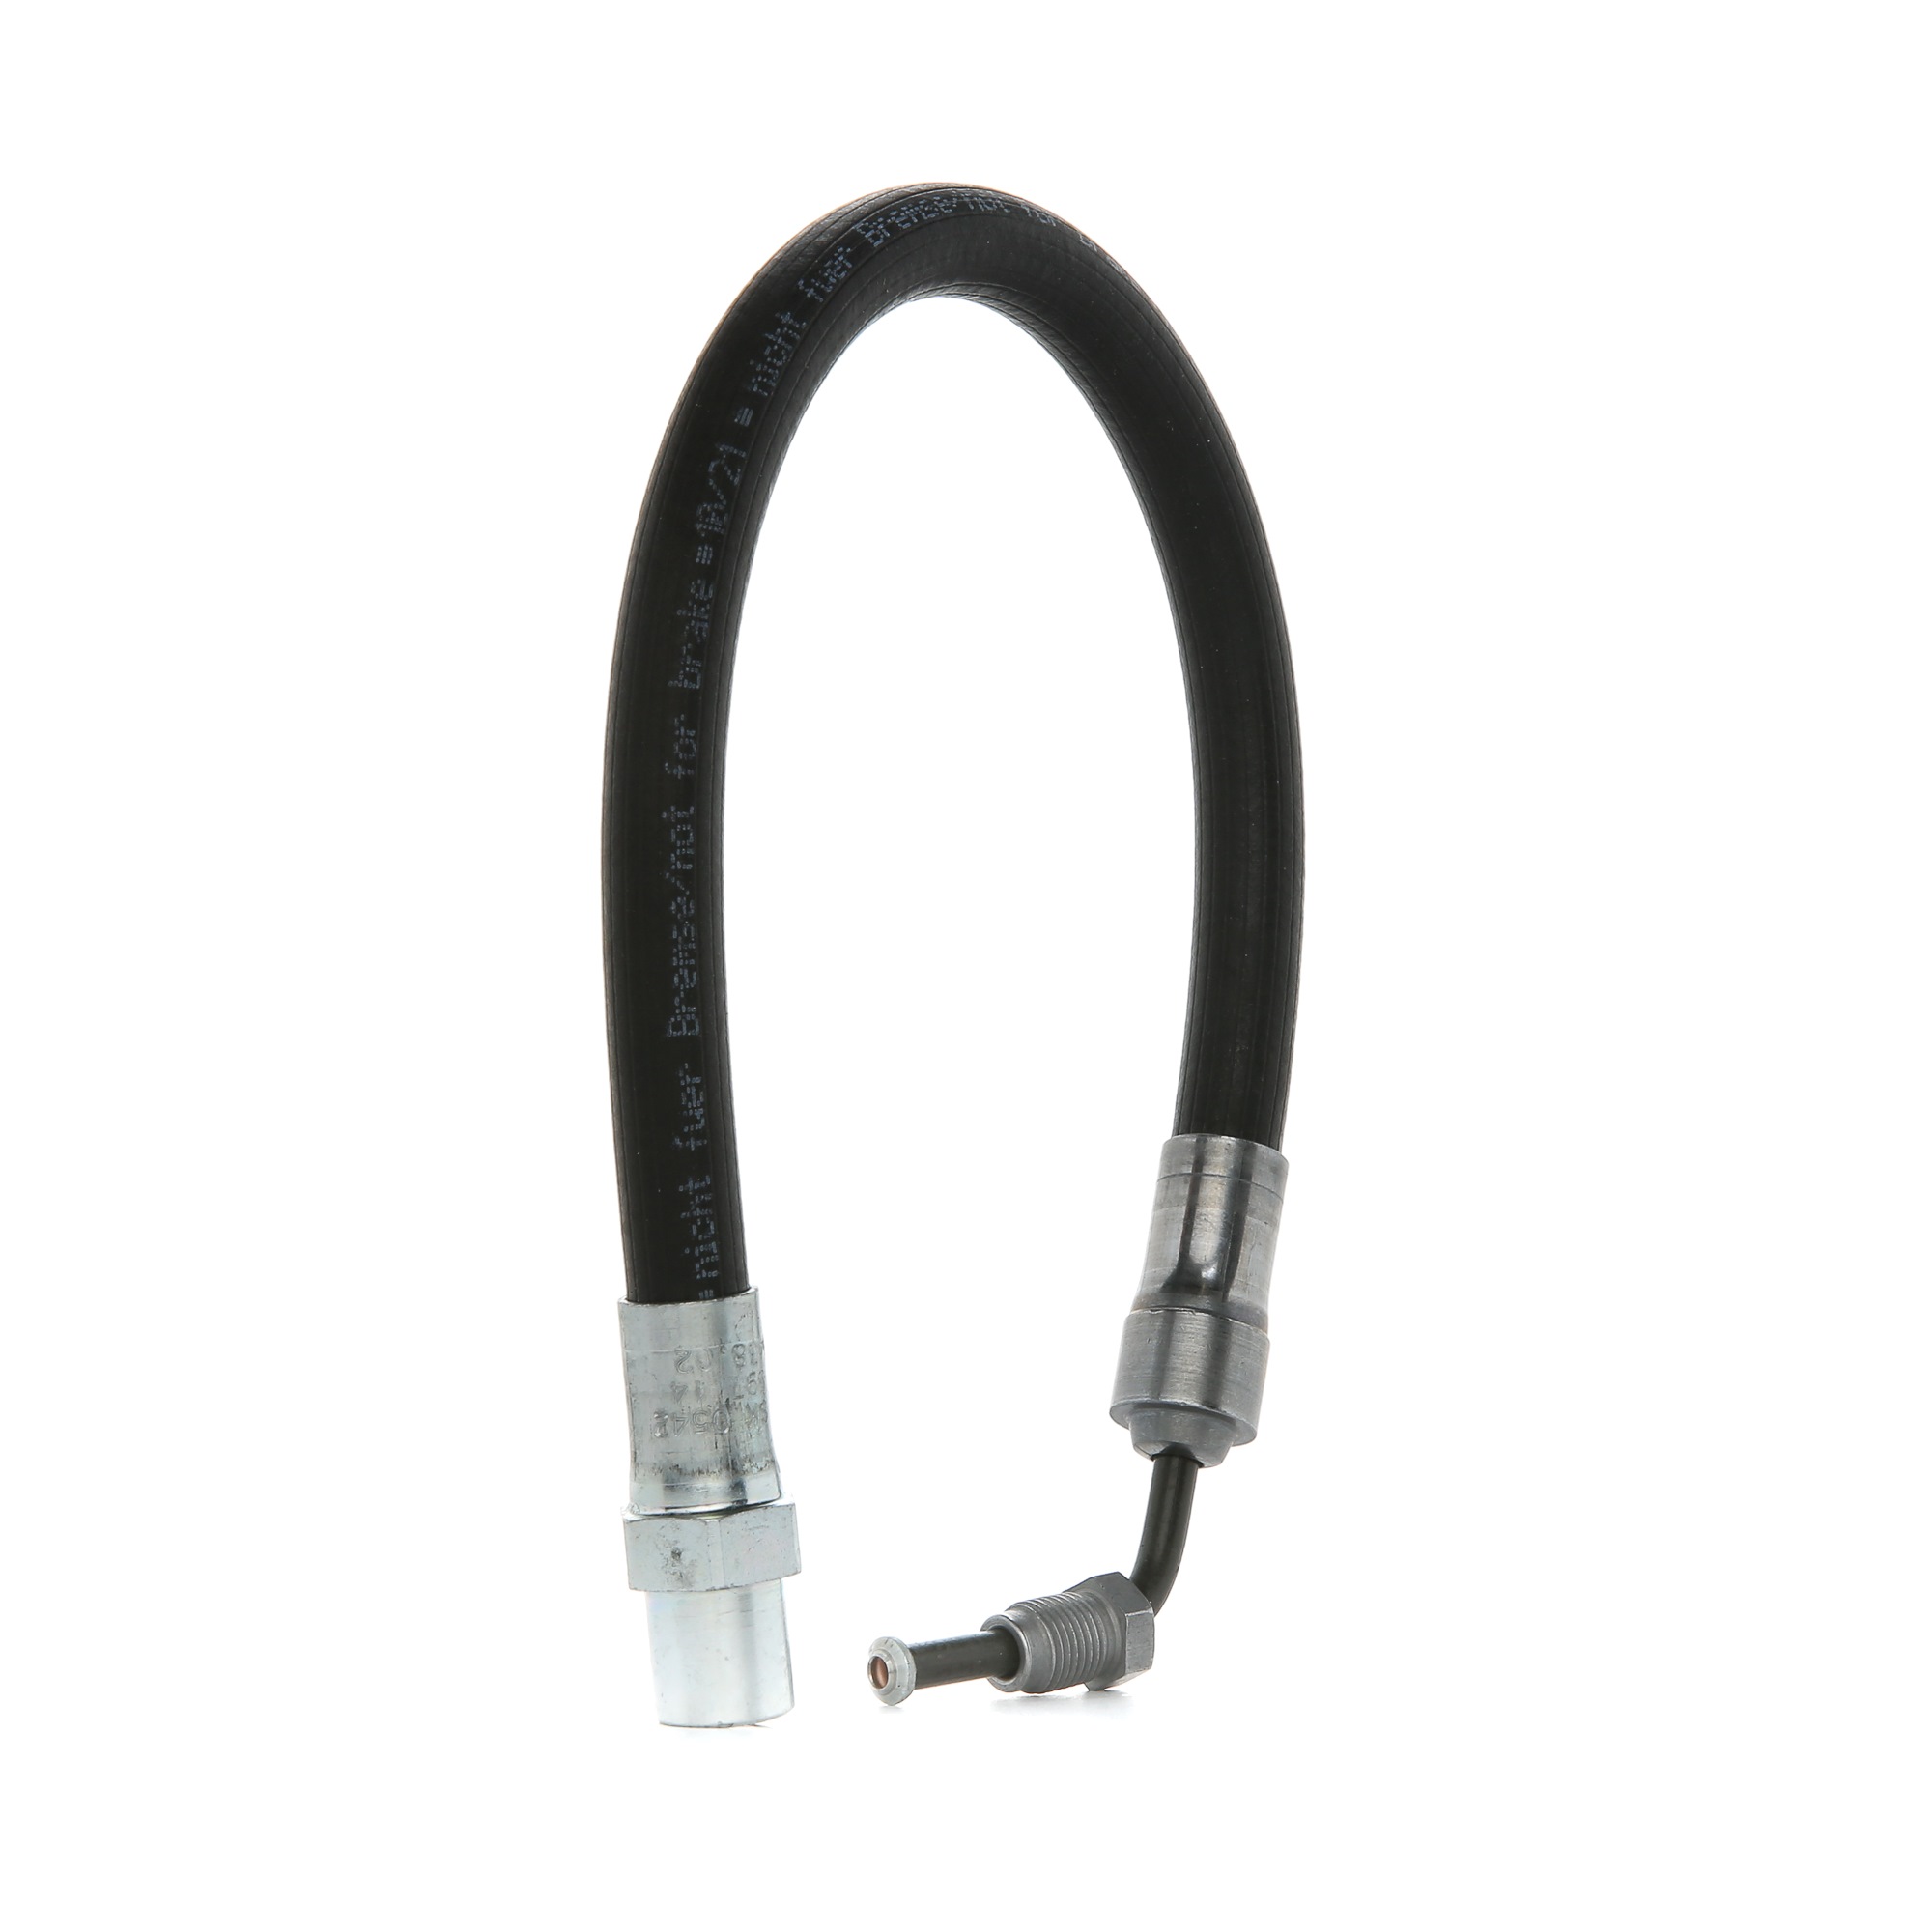 BMW Clutch Hose FTE 4201800 at a good price